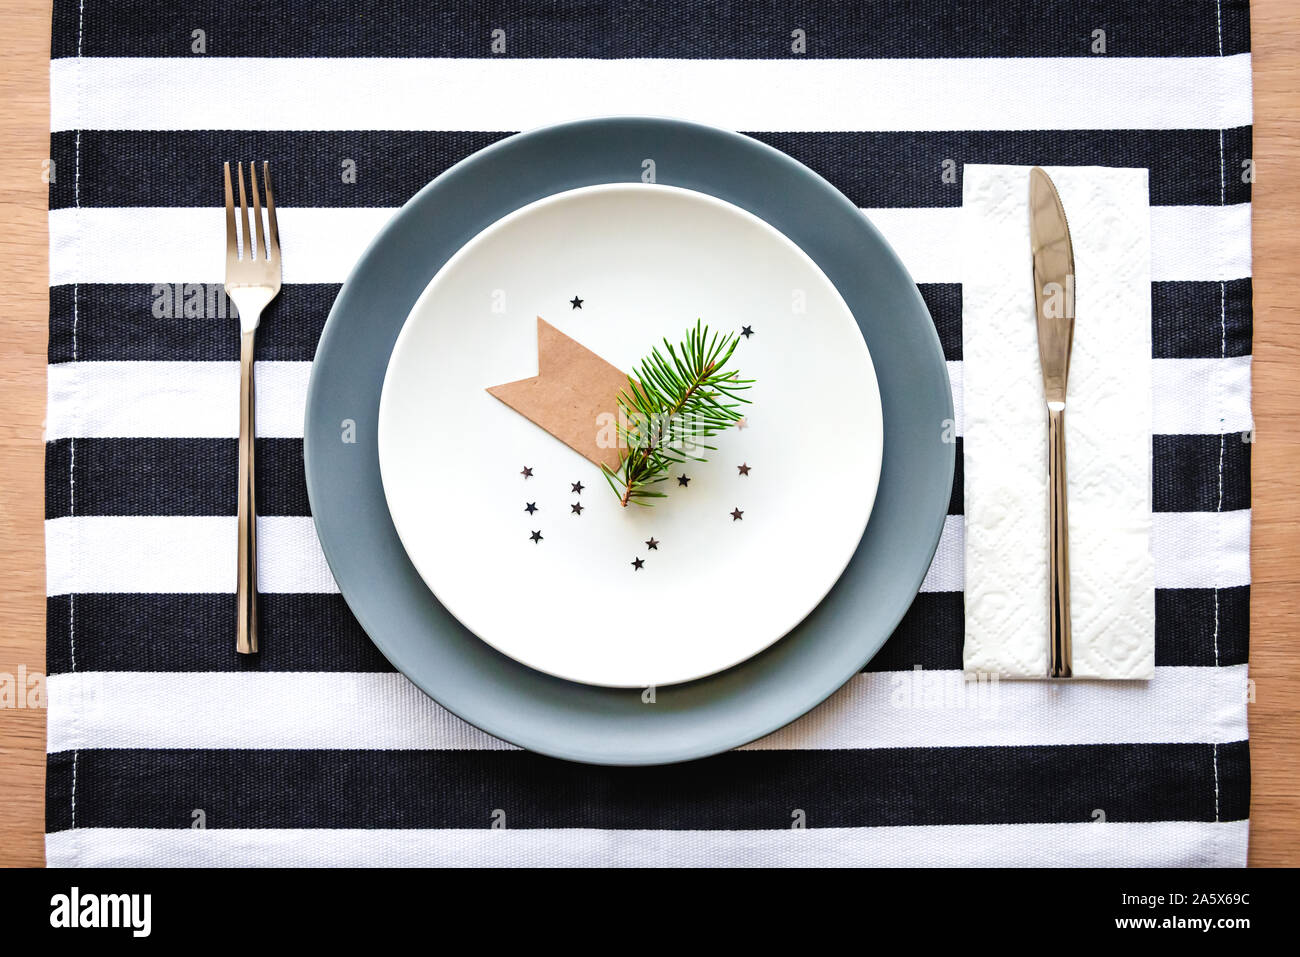 Top view of christmas table setting. Festive plate decoration. Stock Photo